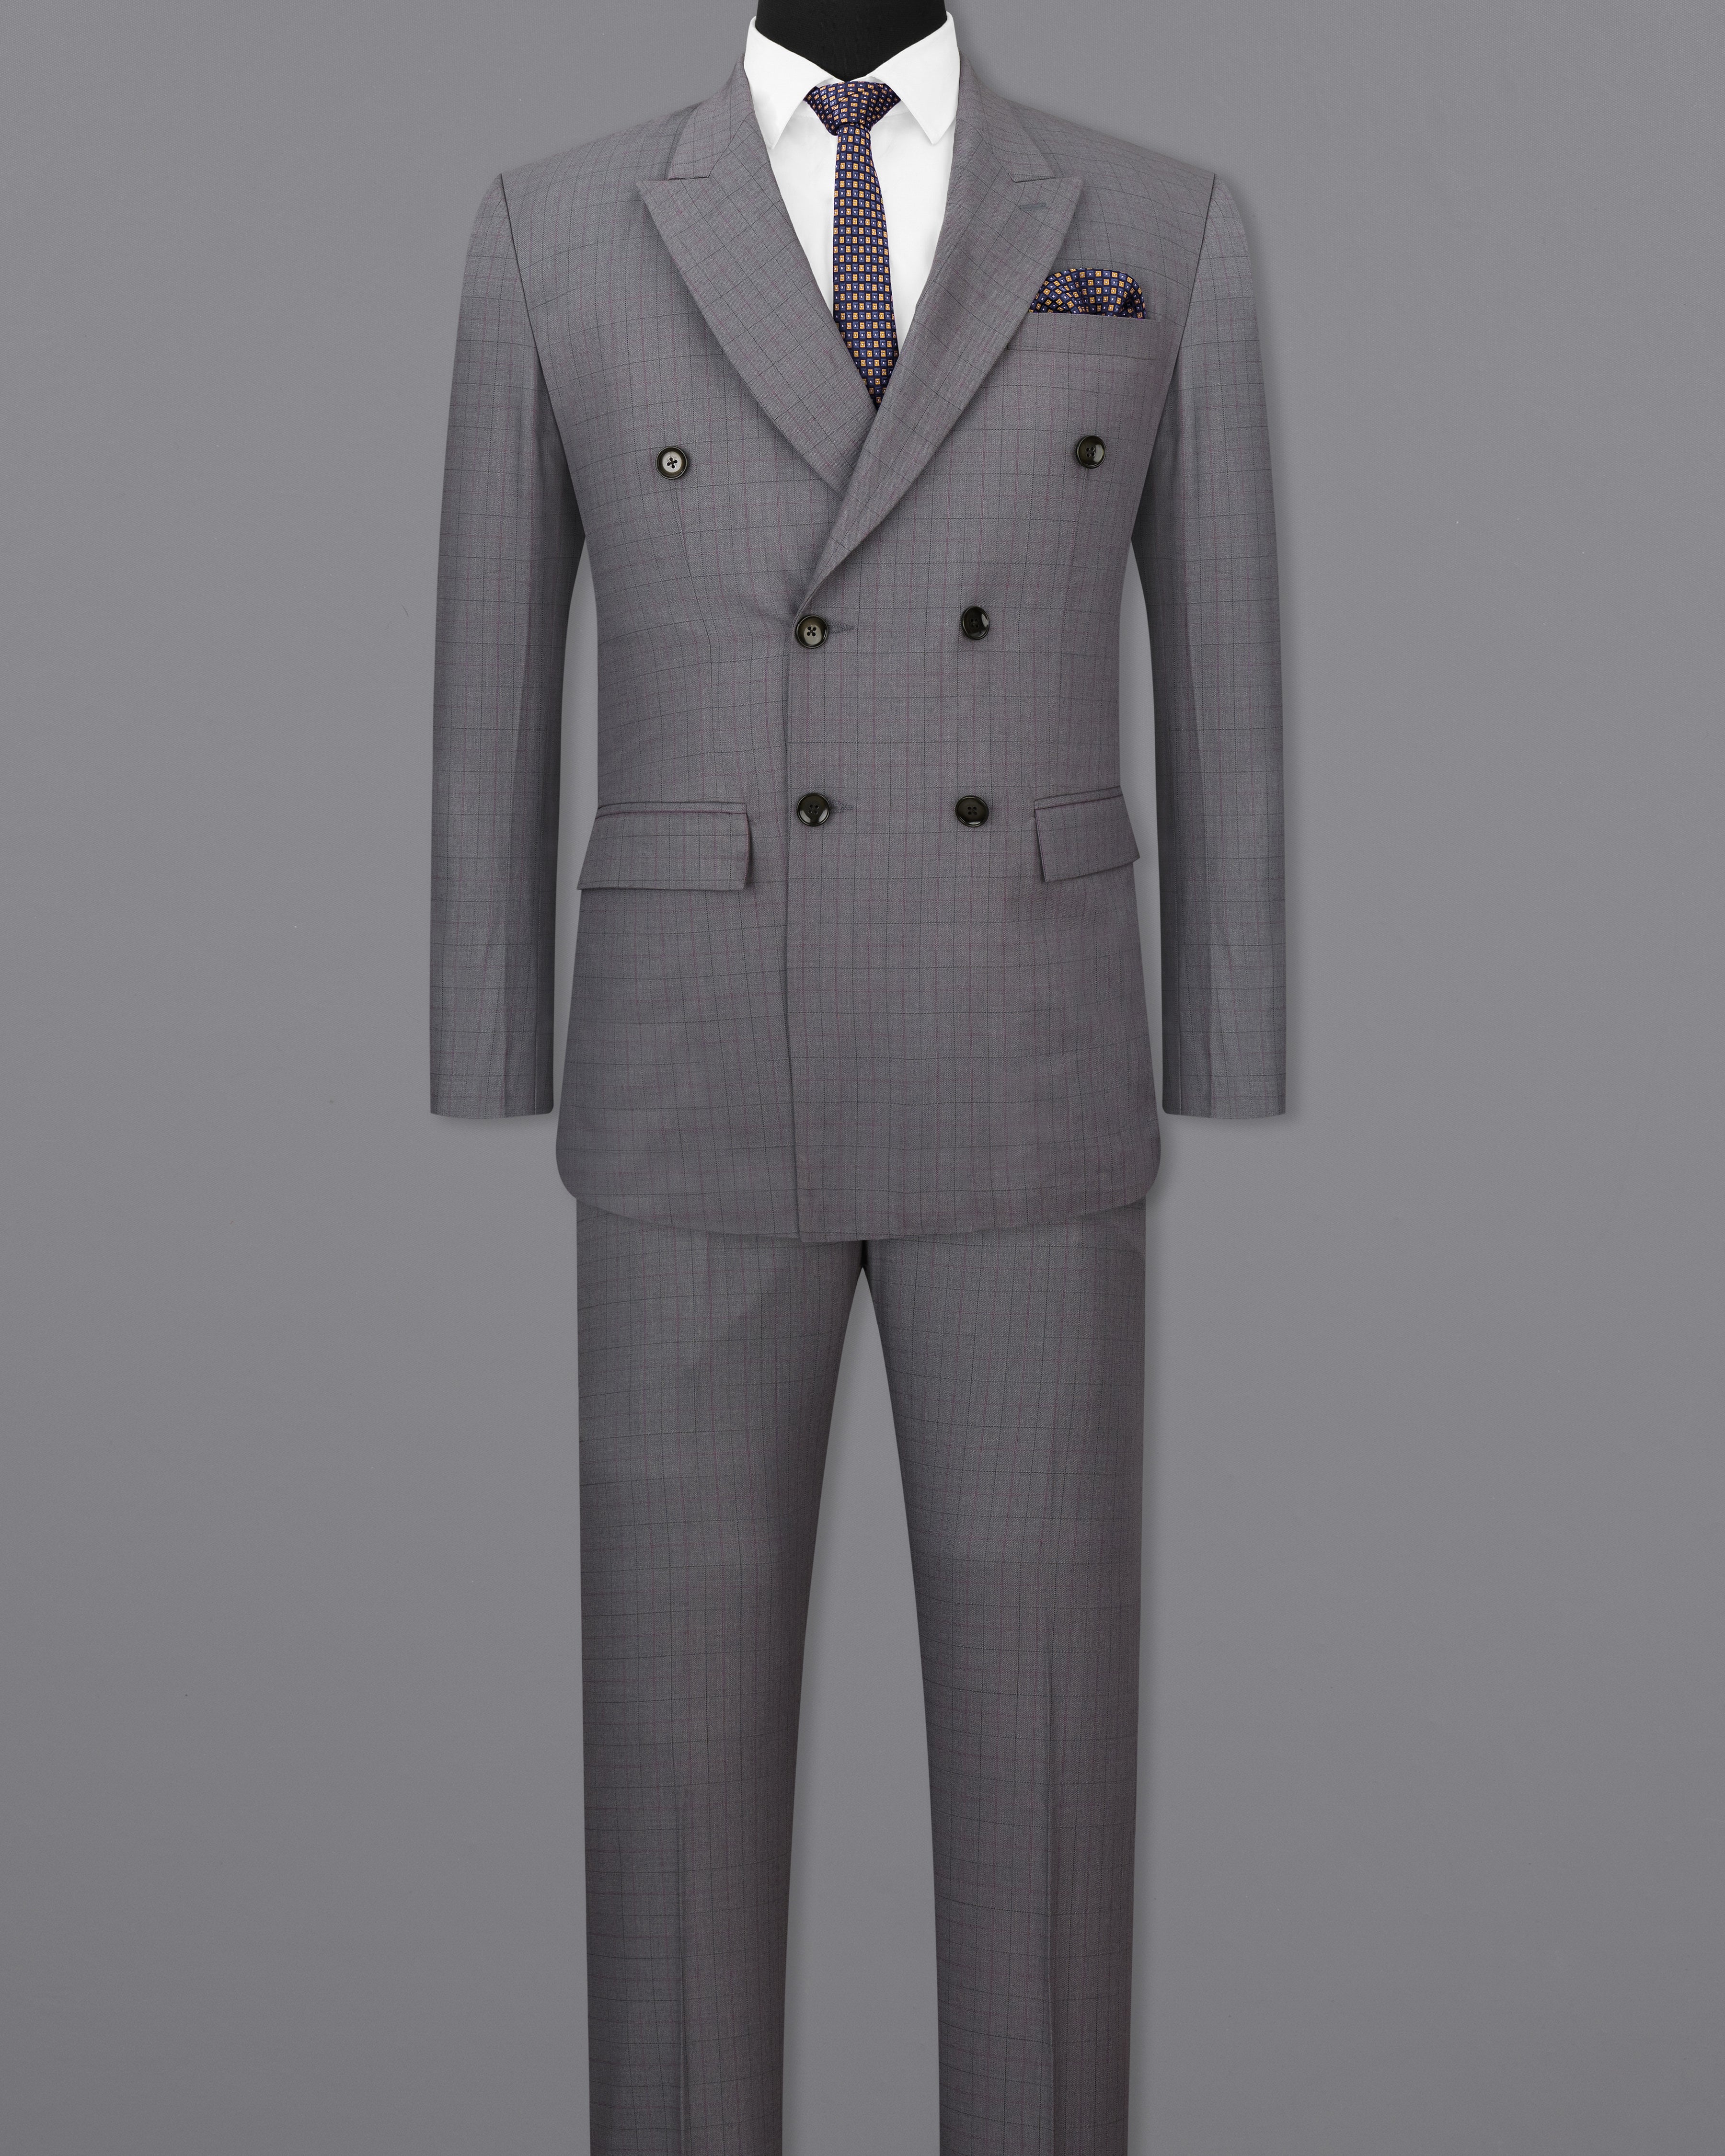 Storm Dust Gray Plaid Double Breasted Suit ST2477-DB-36, ST2477-DB-38, ST2477-DB-40, ST2477-DB-42, ST2477-DB-44, ST2477-DB-46, ST2477-DB-48, ST2477-DB-50, ST2477-DB-52, ST2477-DB-54, ST2477-DB-56, ST2477-DB-58, ST2477-DB-60